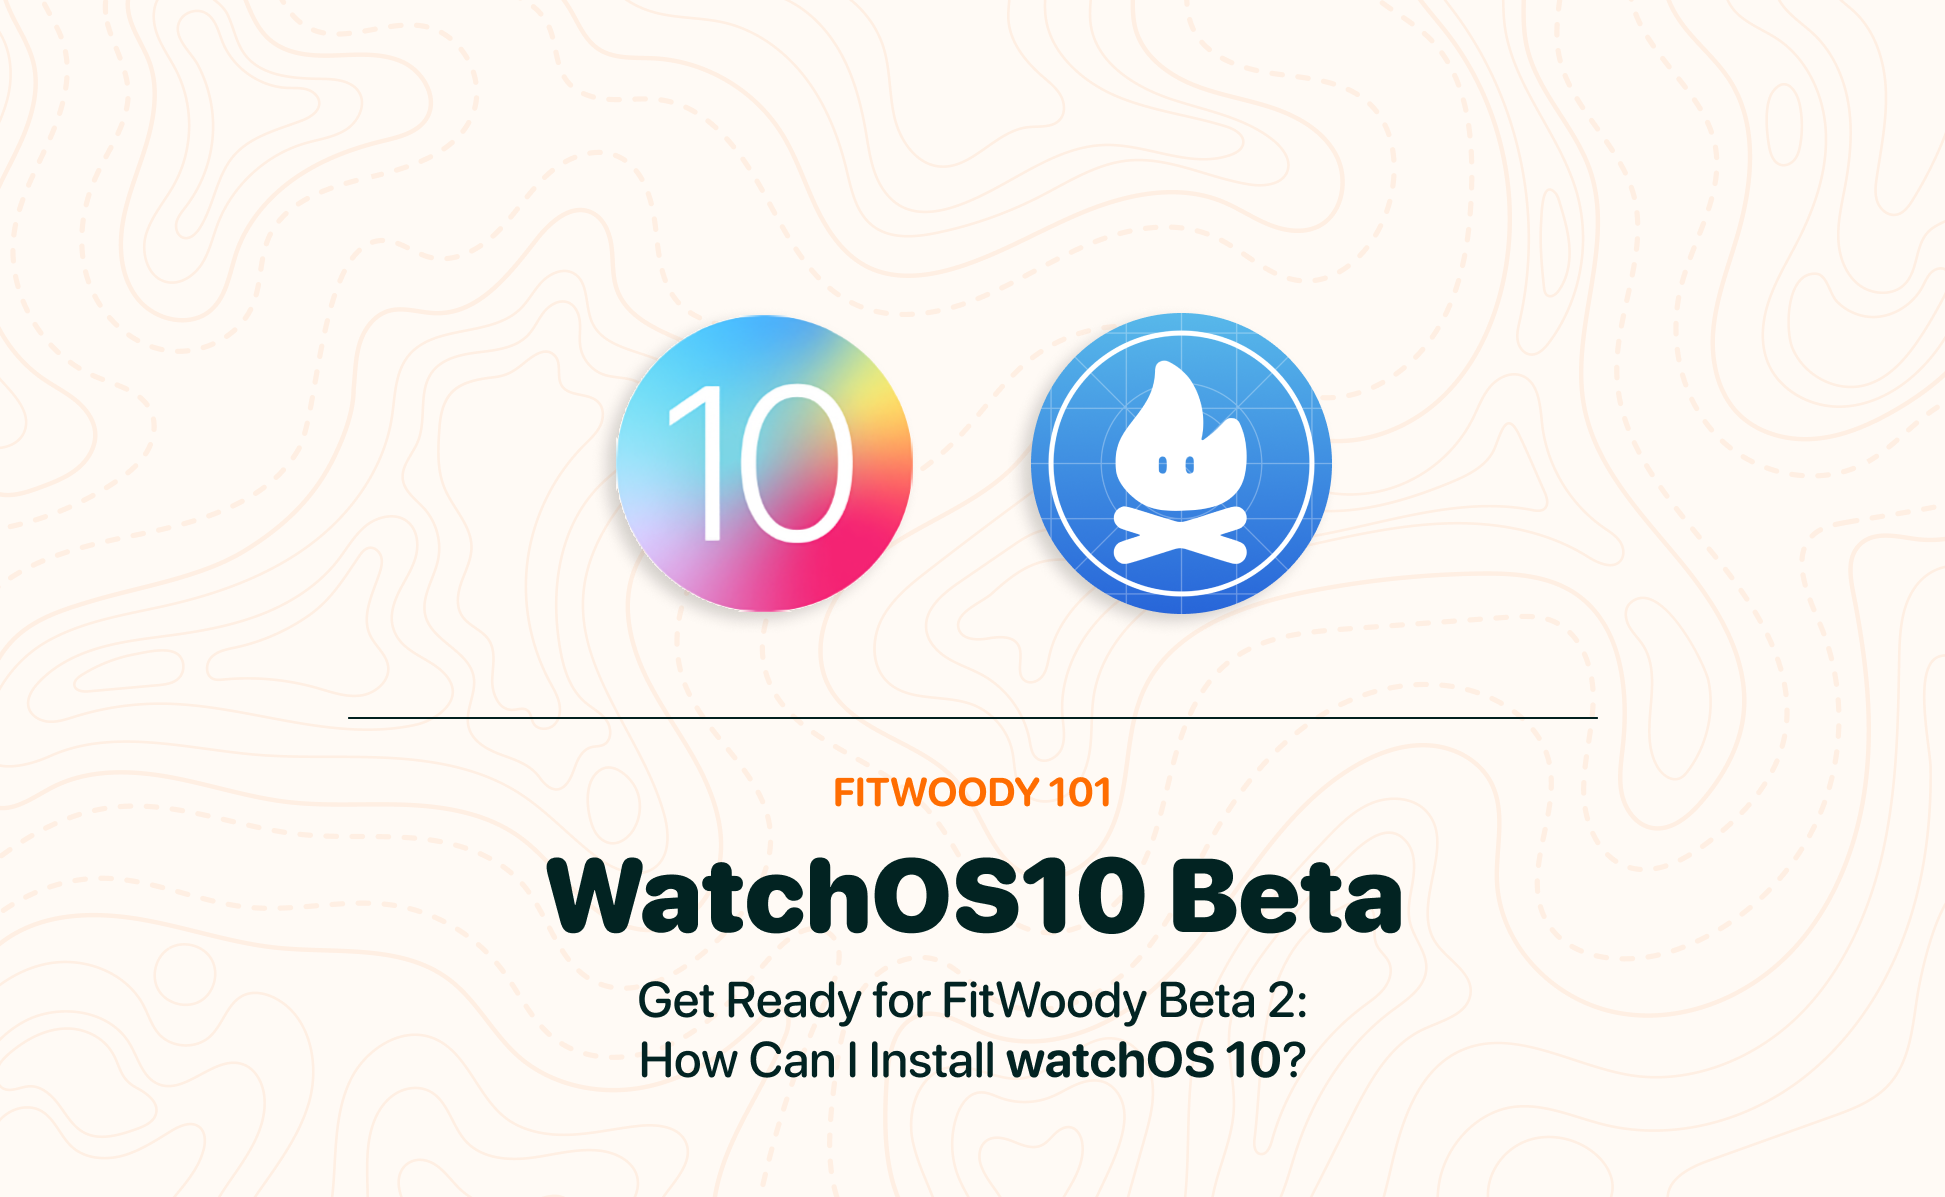 Your Guide to watchOS 10 Beta!